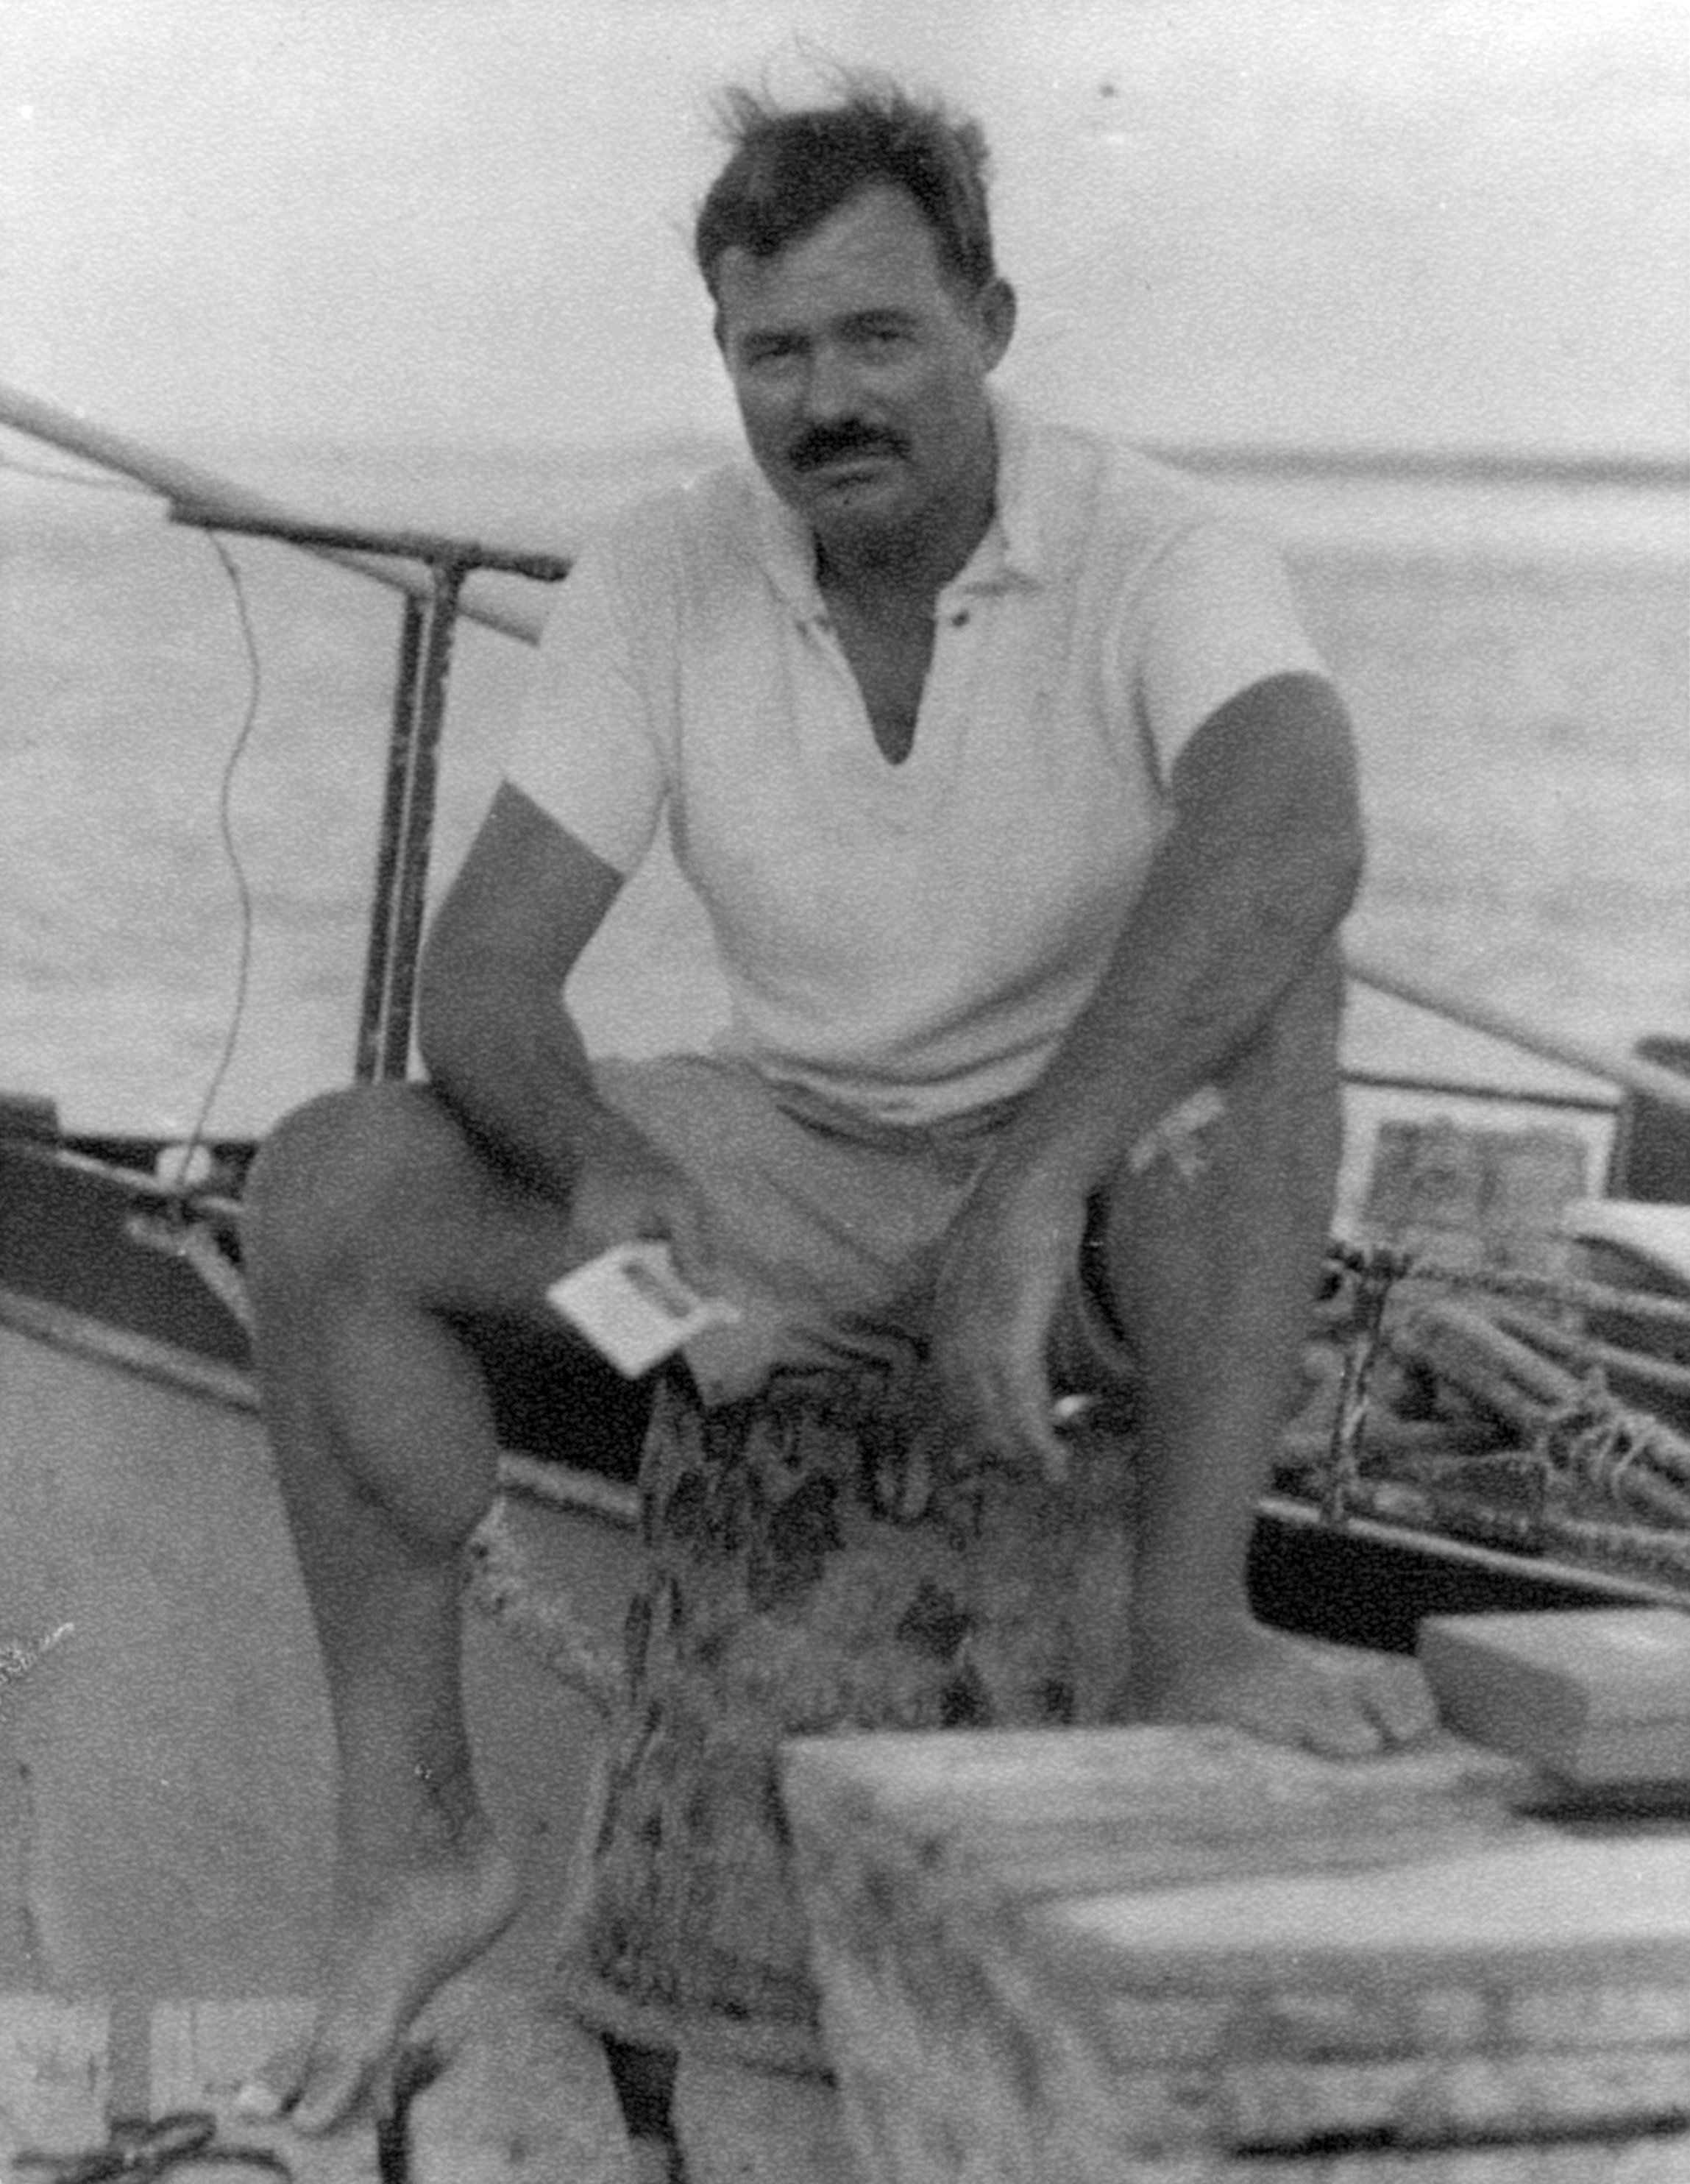 EH6670P   1930s Ernest Hemingway sitting on a dock next to the Pilar, 1930s.  Photographer unknown in the Ernest Hemingway Collection of the John F. Kennedy Presidential Library and Museum, Boston.